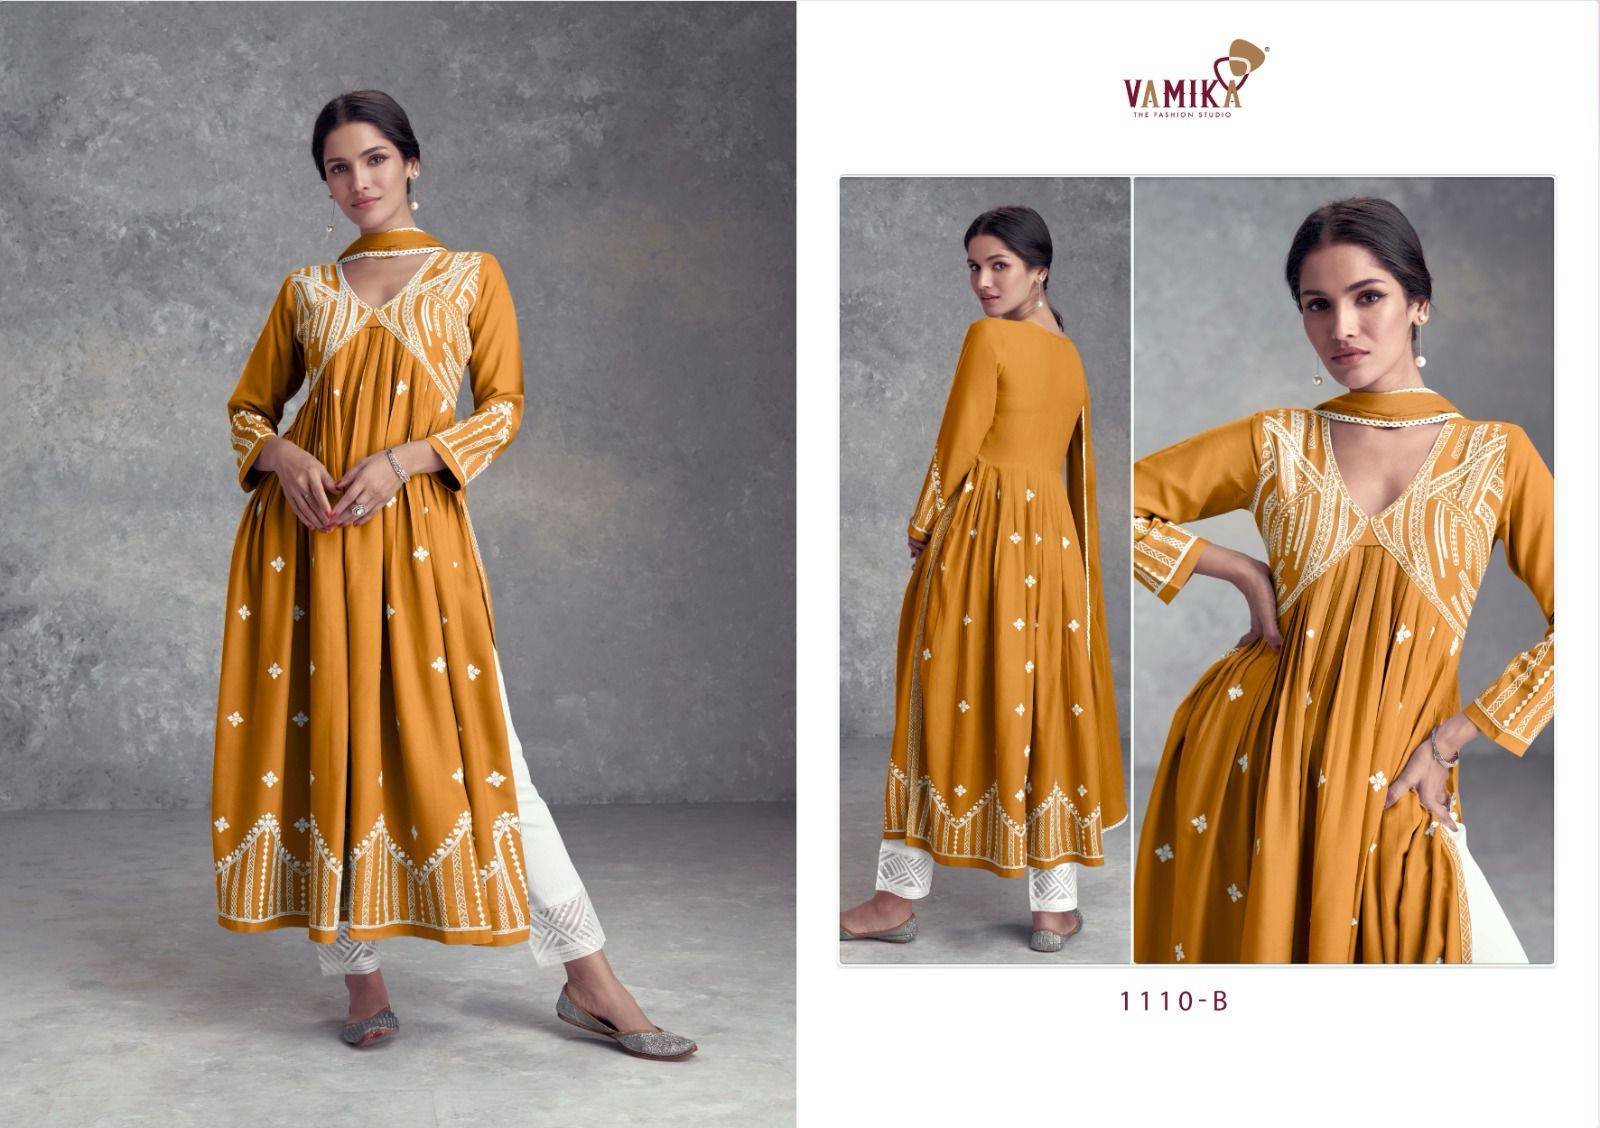 Aadhira Vol-8 By Vamika 1110-A To 1110-E Series Beautiful Festive Suits Colorful Stylish Fancy Casual Wear & Ethnic Wear Pure Viscose Rayon Embroidery Dresses At Wholesale Price